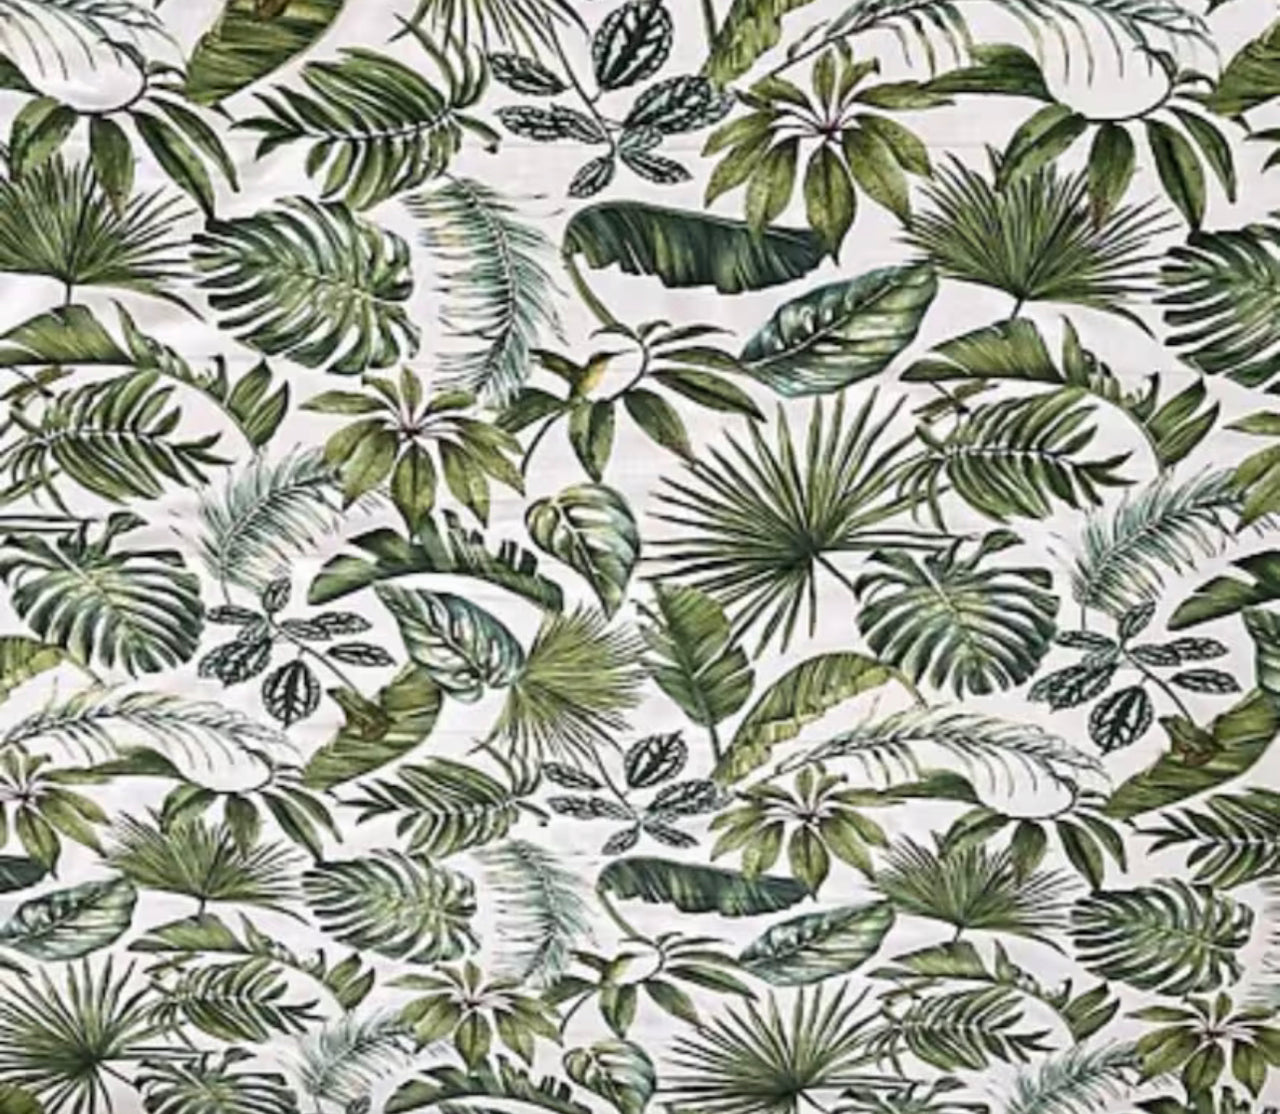 Tropical Garden Cotton Fabric / Botanical Leaves Pattern with Frog, Hummingbird, Dragonfly, Insect Accents